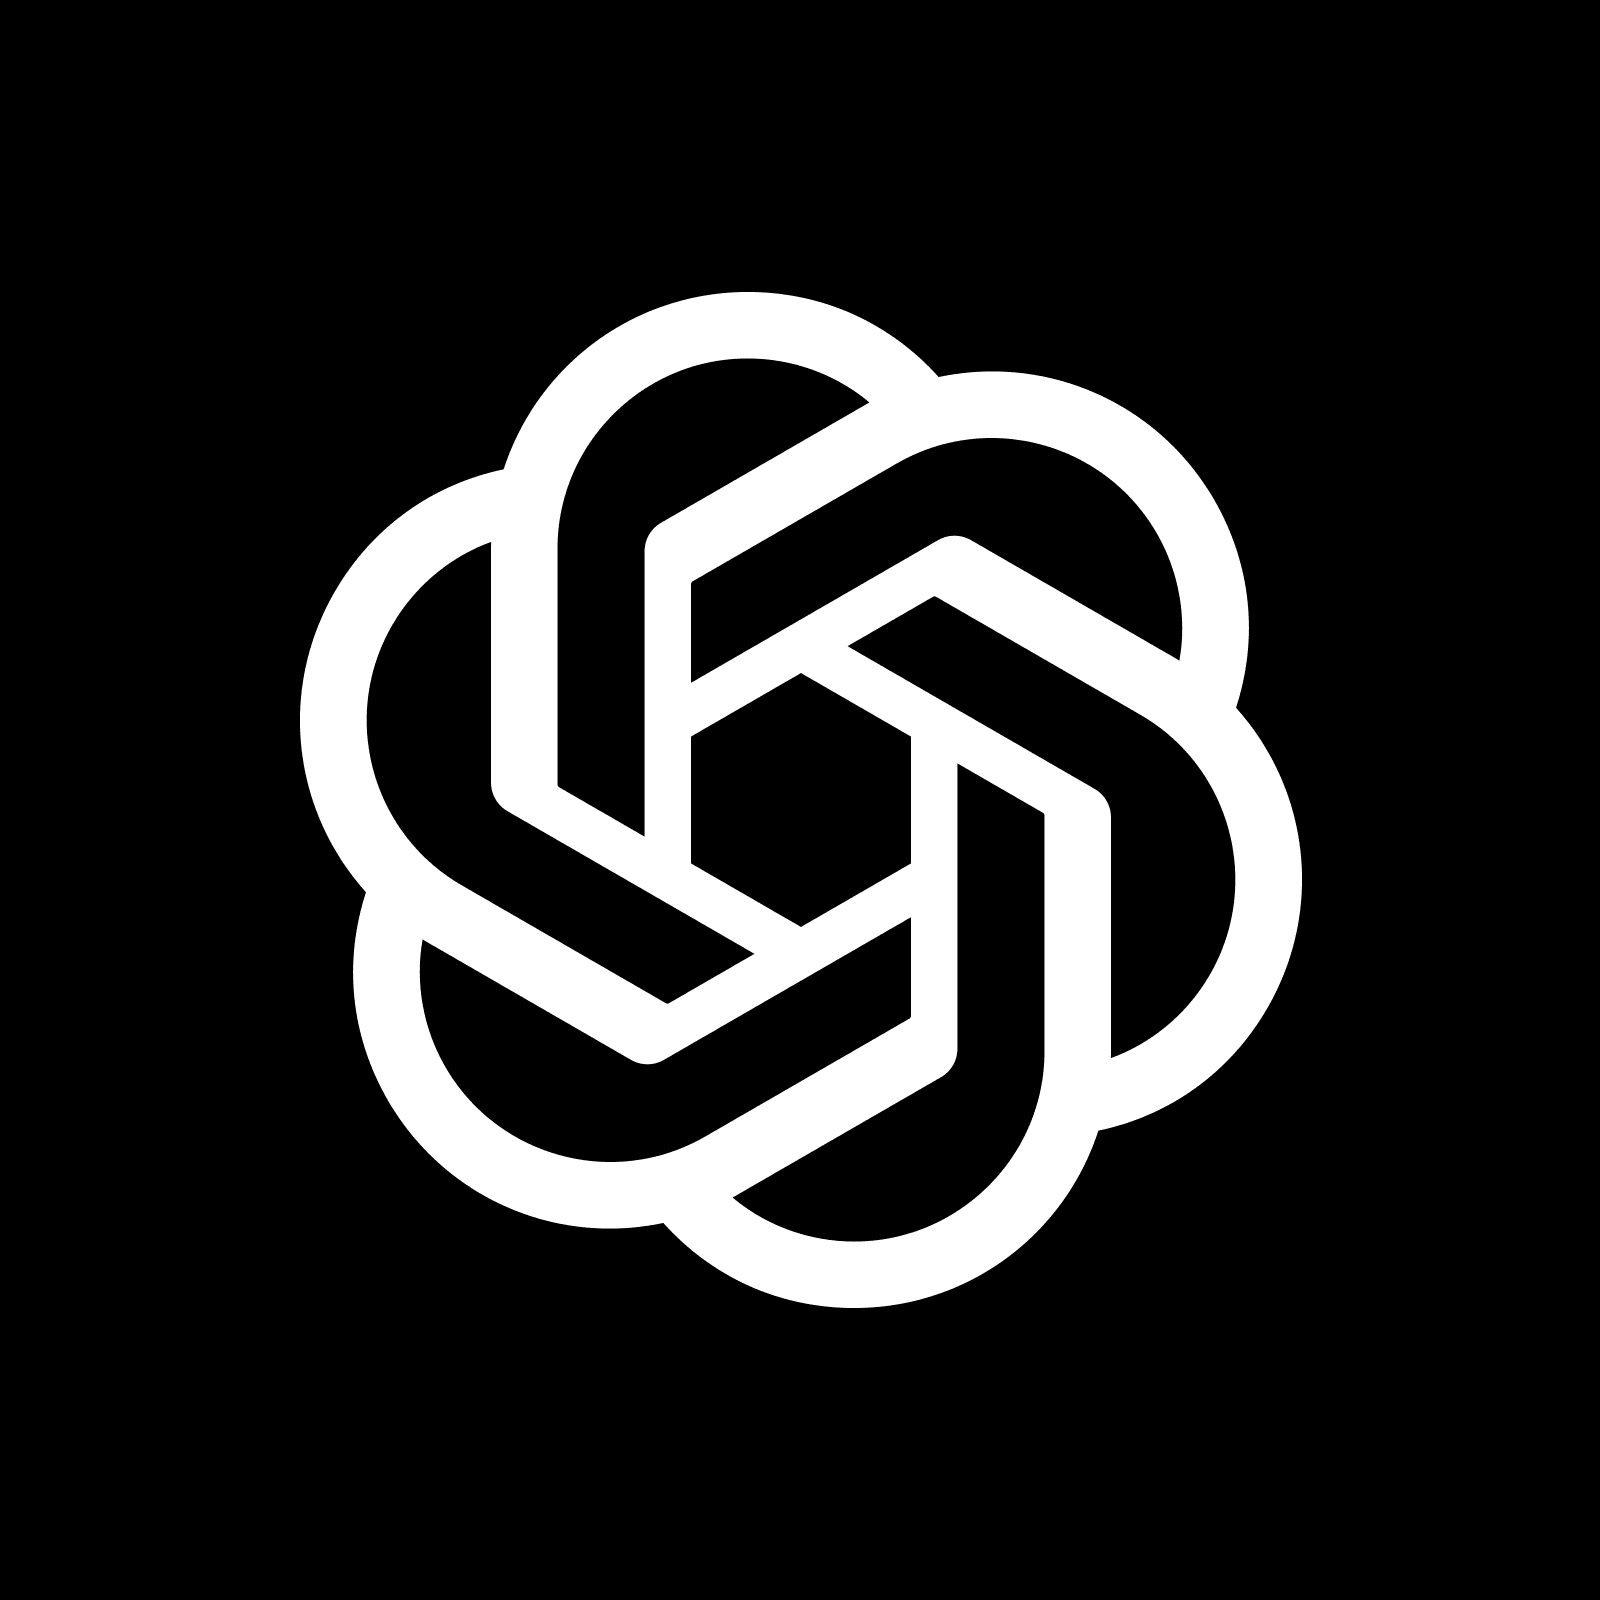 OpenAI logo icon, a graphical spiral resembling a flower in white line art against a black background.